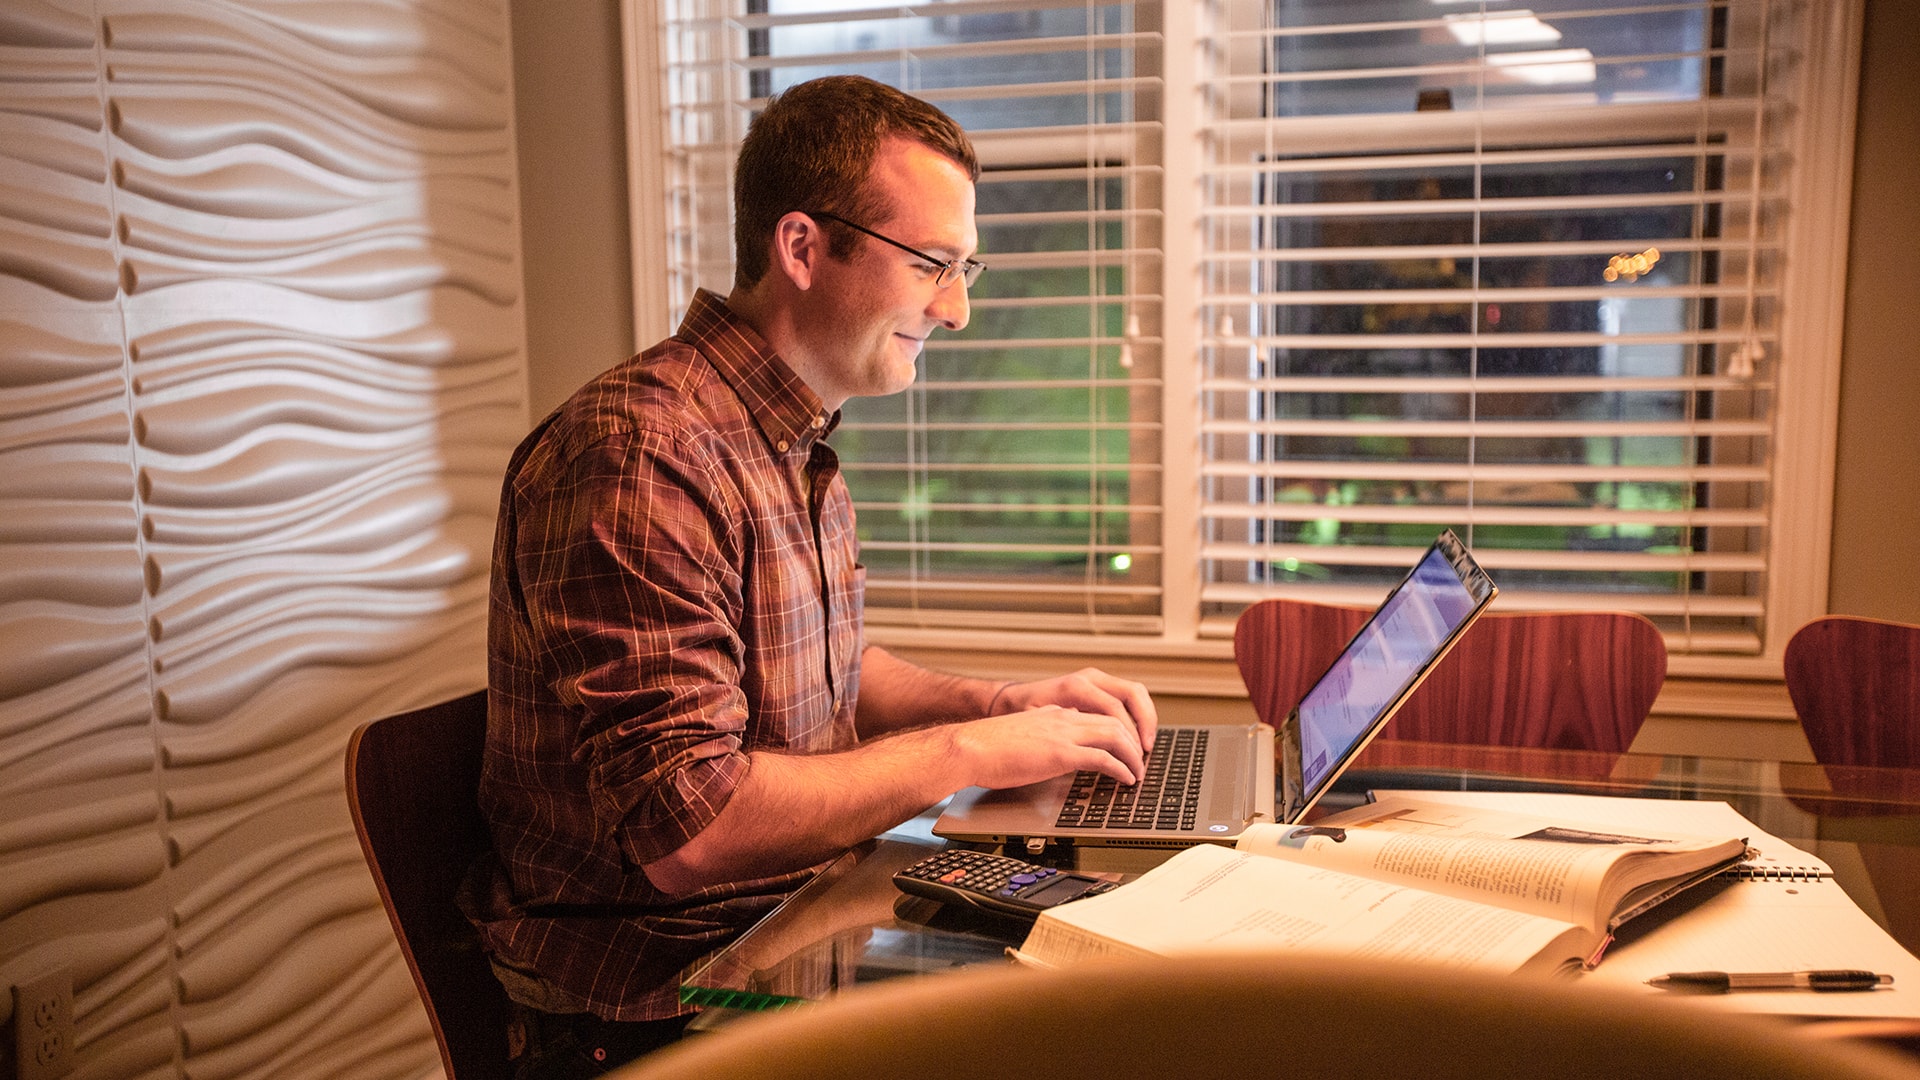 Chris Eldridge, who earned a cybersecurity degree, sitting in a home office working on a laptop with an open notebook, text book and calculator on the desk beside him.